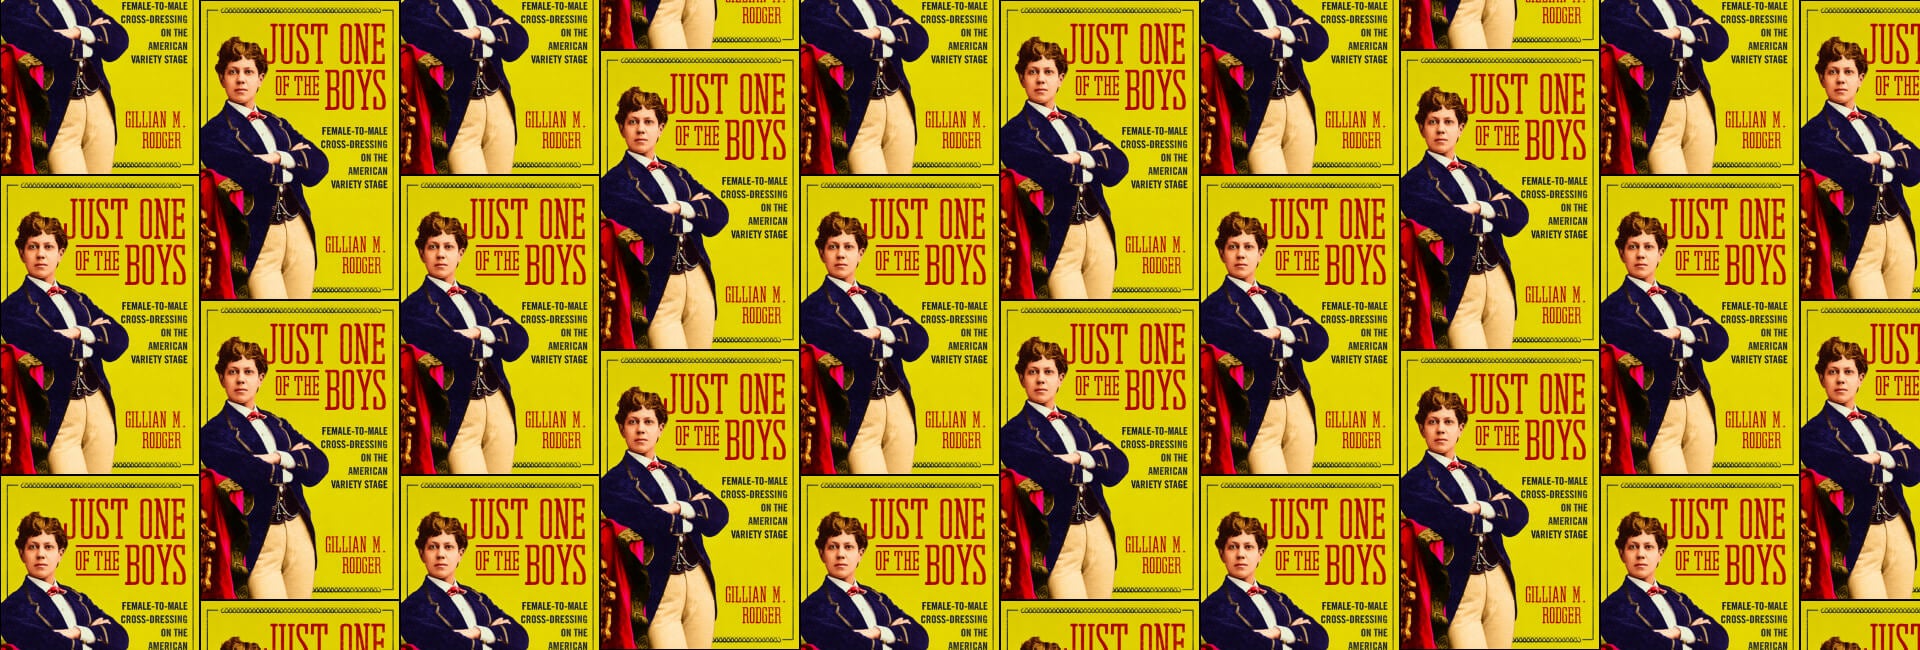 Gillian-Rodger - Just One of the Boys Book CoverGillian-Rodger - Just One of the Boys Book Cover